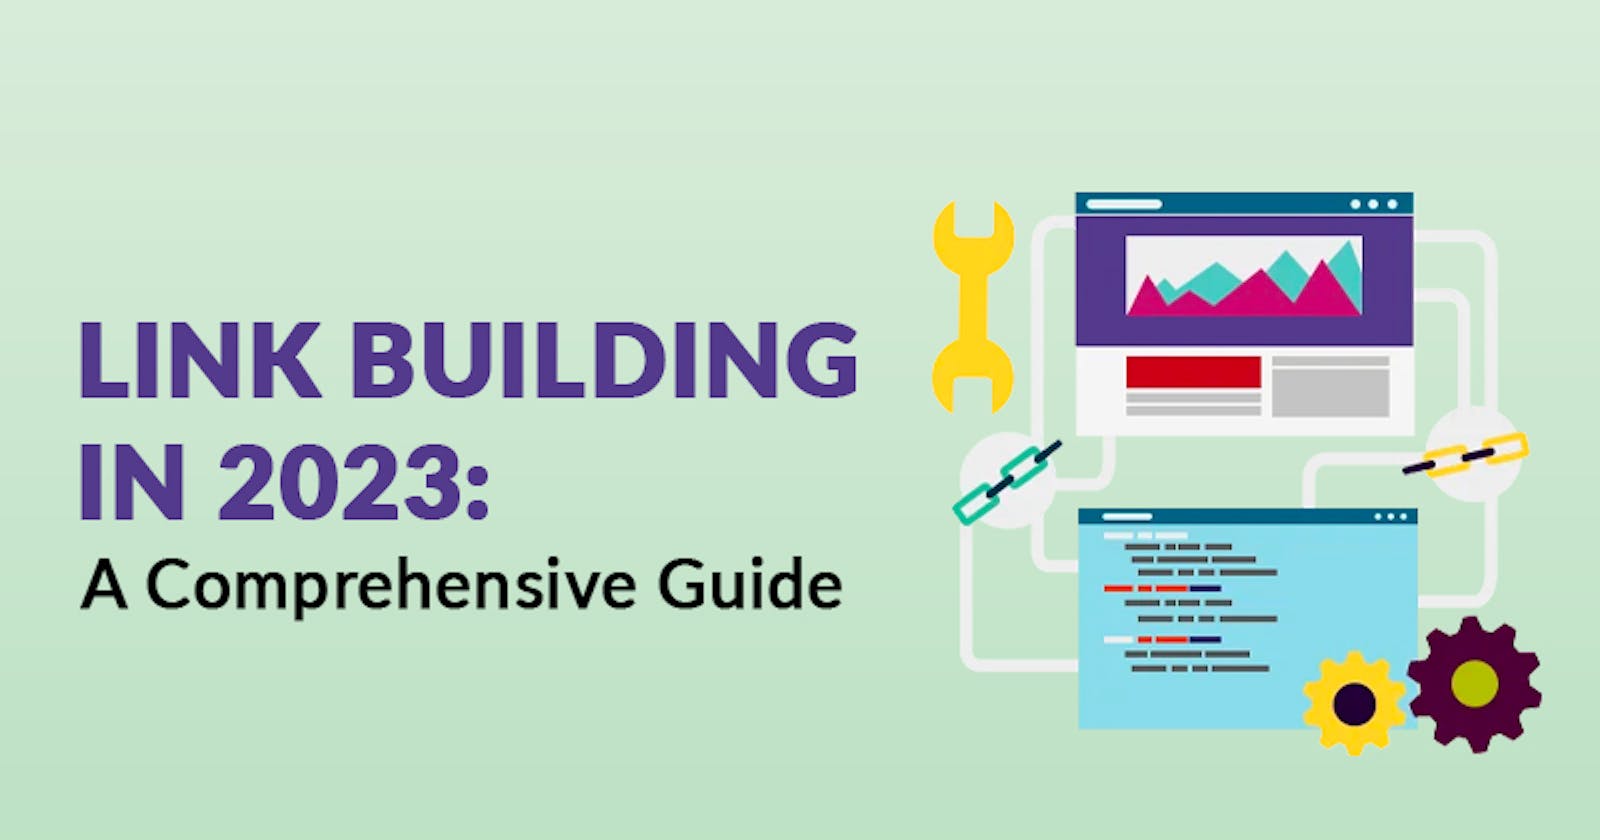 Link Building in 2023: A Comprehensive Guide